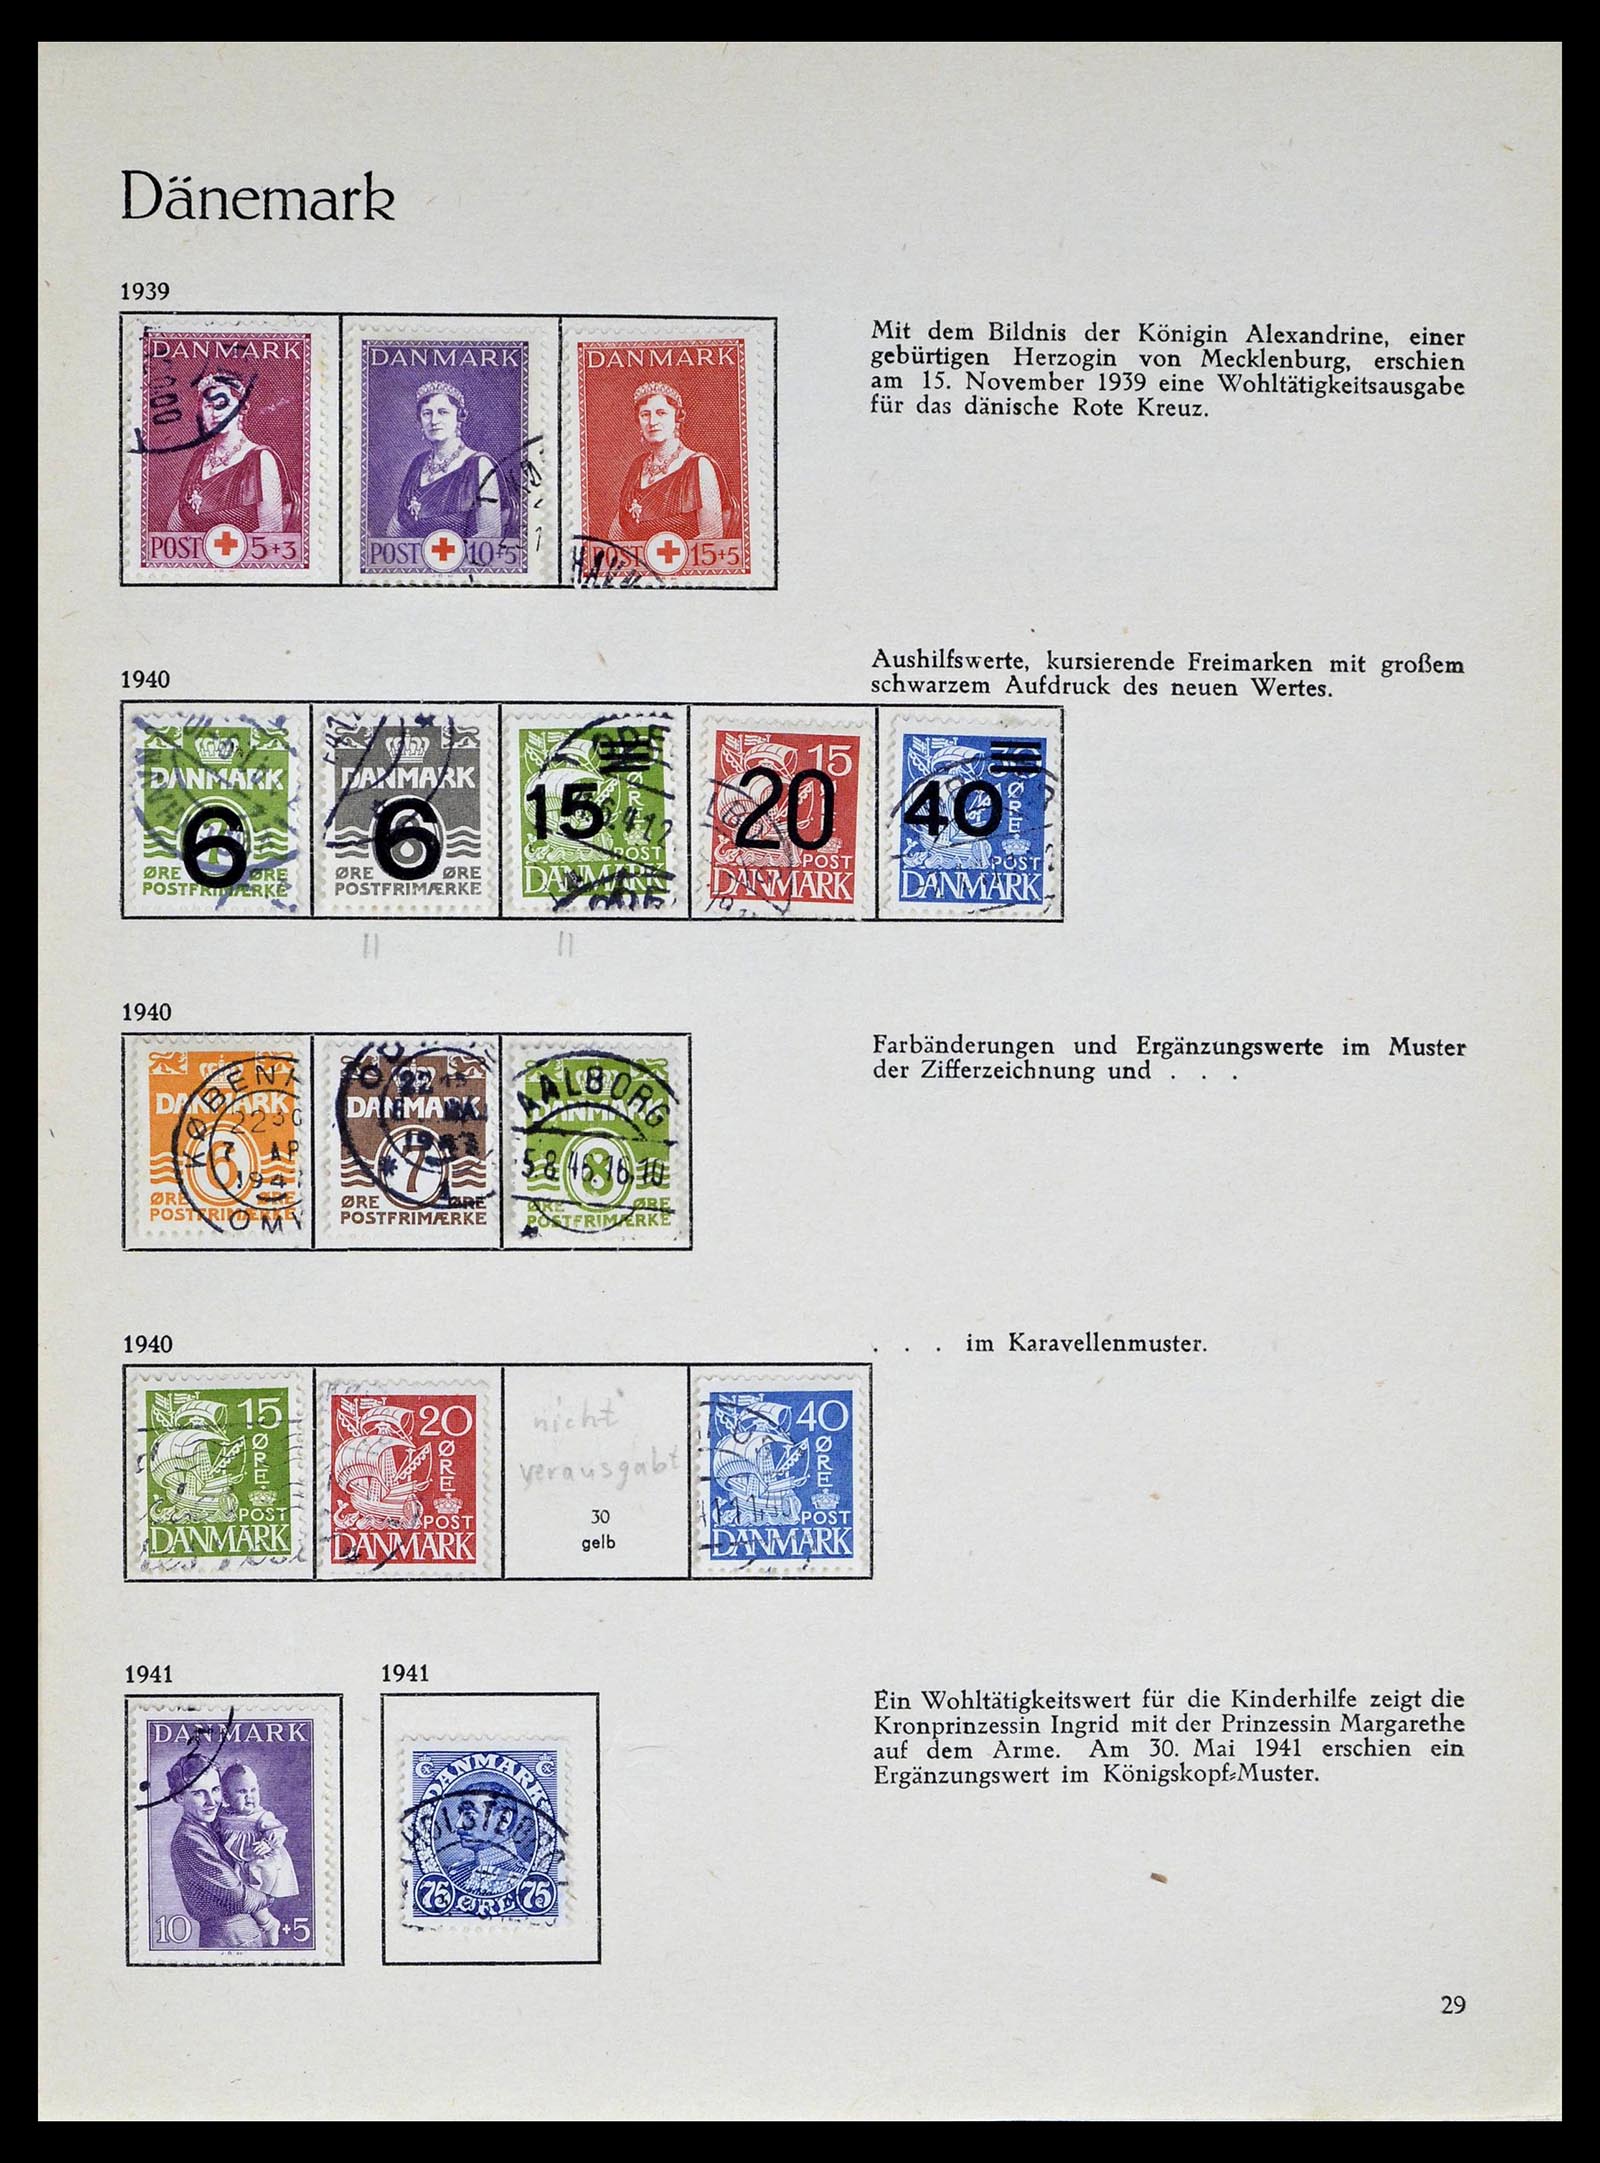 39407 0014 - Stamp collection 39407 Denmark 1851-1969.